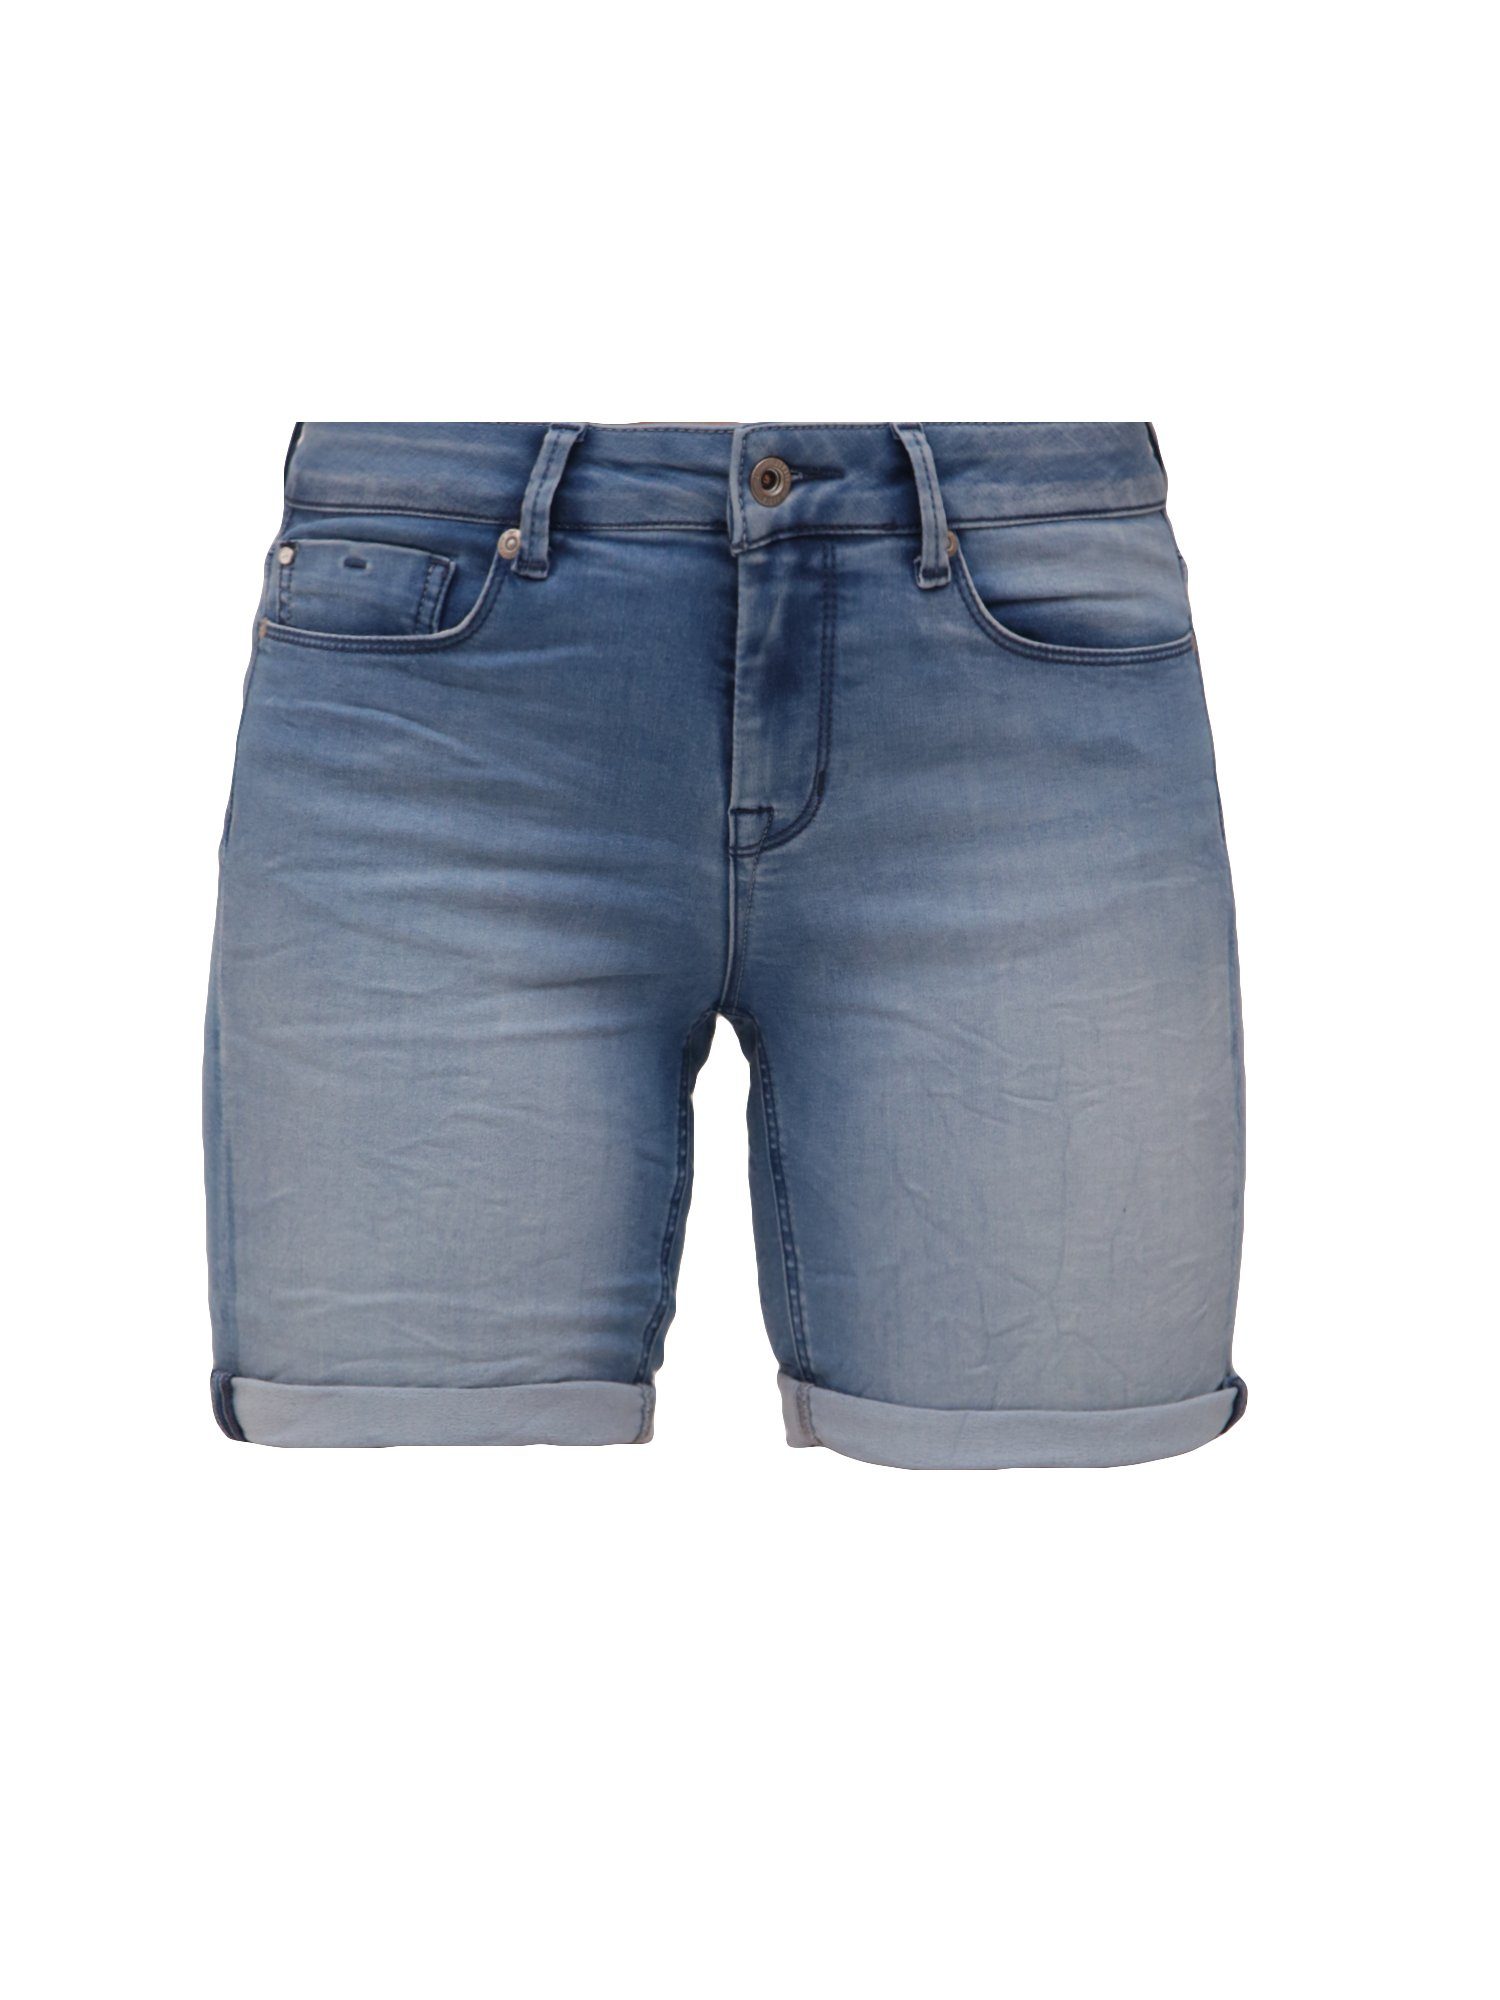 Blue Shorts Miracle Lucky Mid im of Denim Five-Pocket-Desig